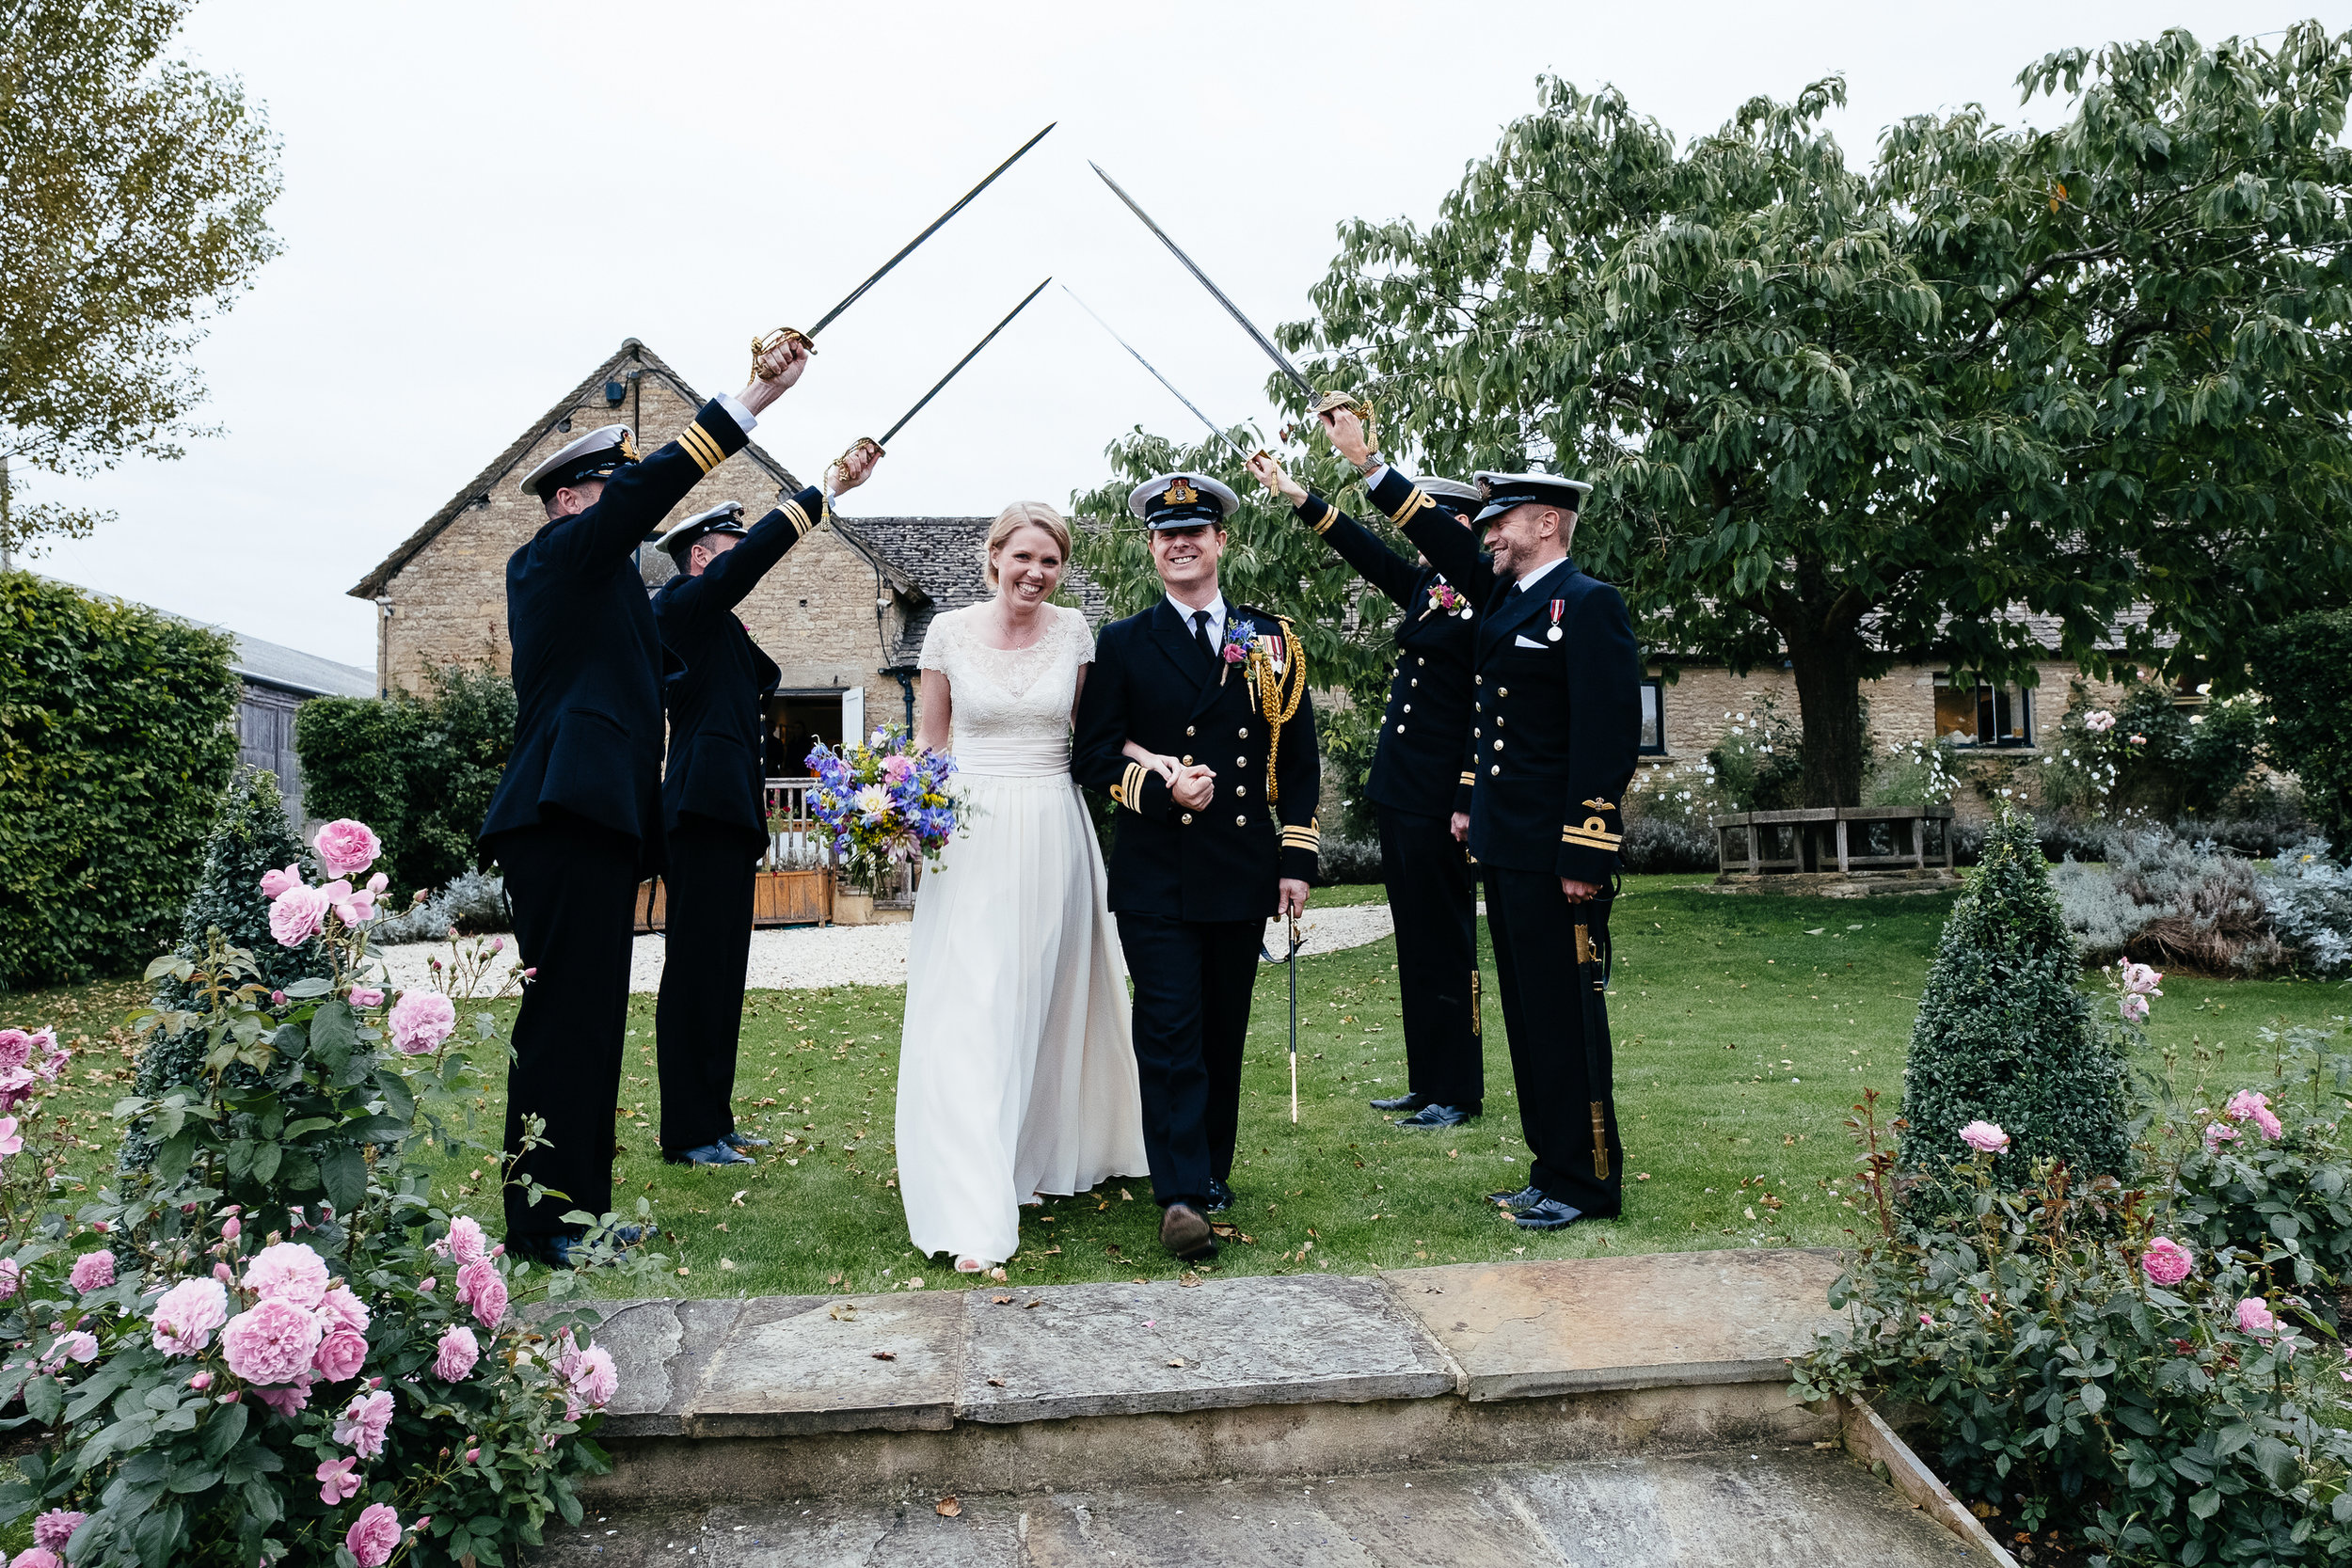 A guard of honor for the bride and groom at Merriscourt Wedding Venue, Oxfordshire